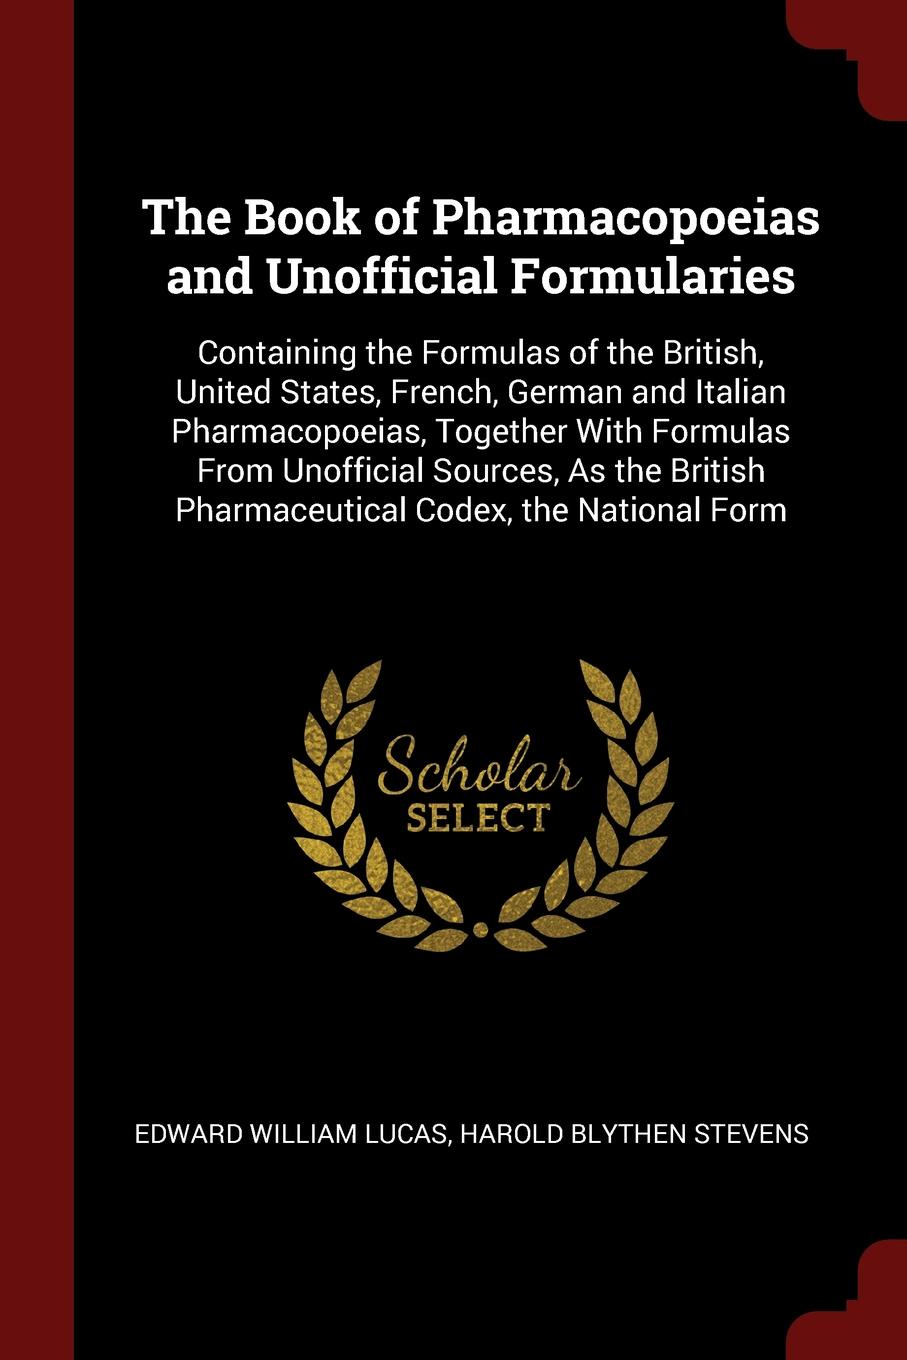 The Book of Pharmacopoeias and Unofficial Formularies. Containing the Formulas of the British, United States, French, German and Italian Pharmacopoeias, Together With Formulas From Unofficial Sources, As the British Pharmaceutical Codex, the Natio...